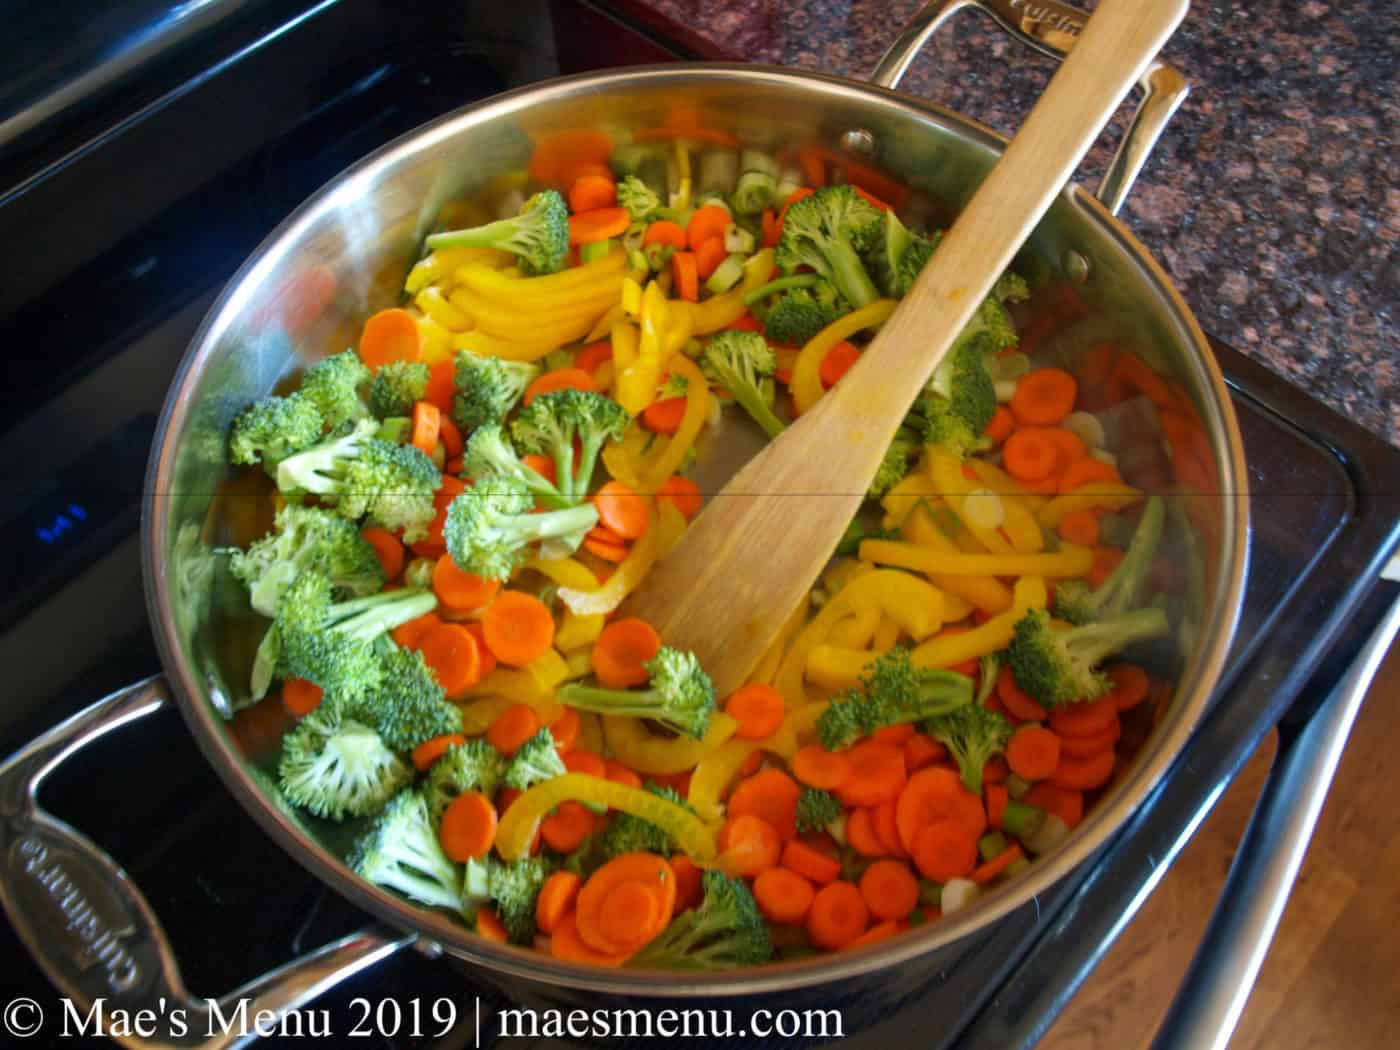 Broccoli, carrots, peppers, and green onions sauteing in a large metal pan.